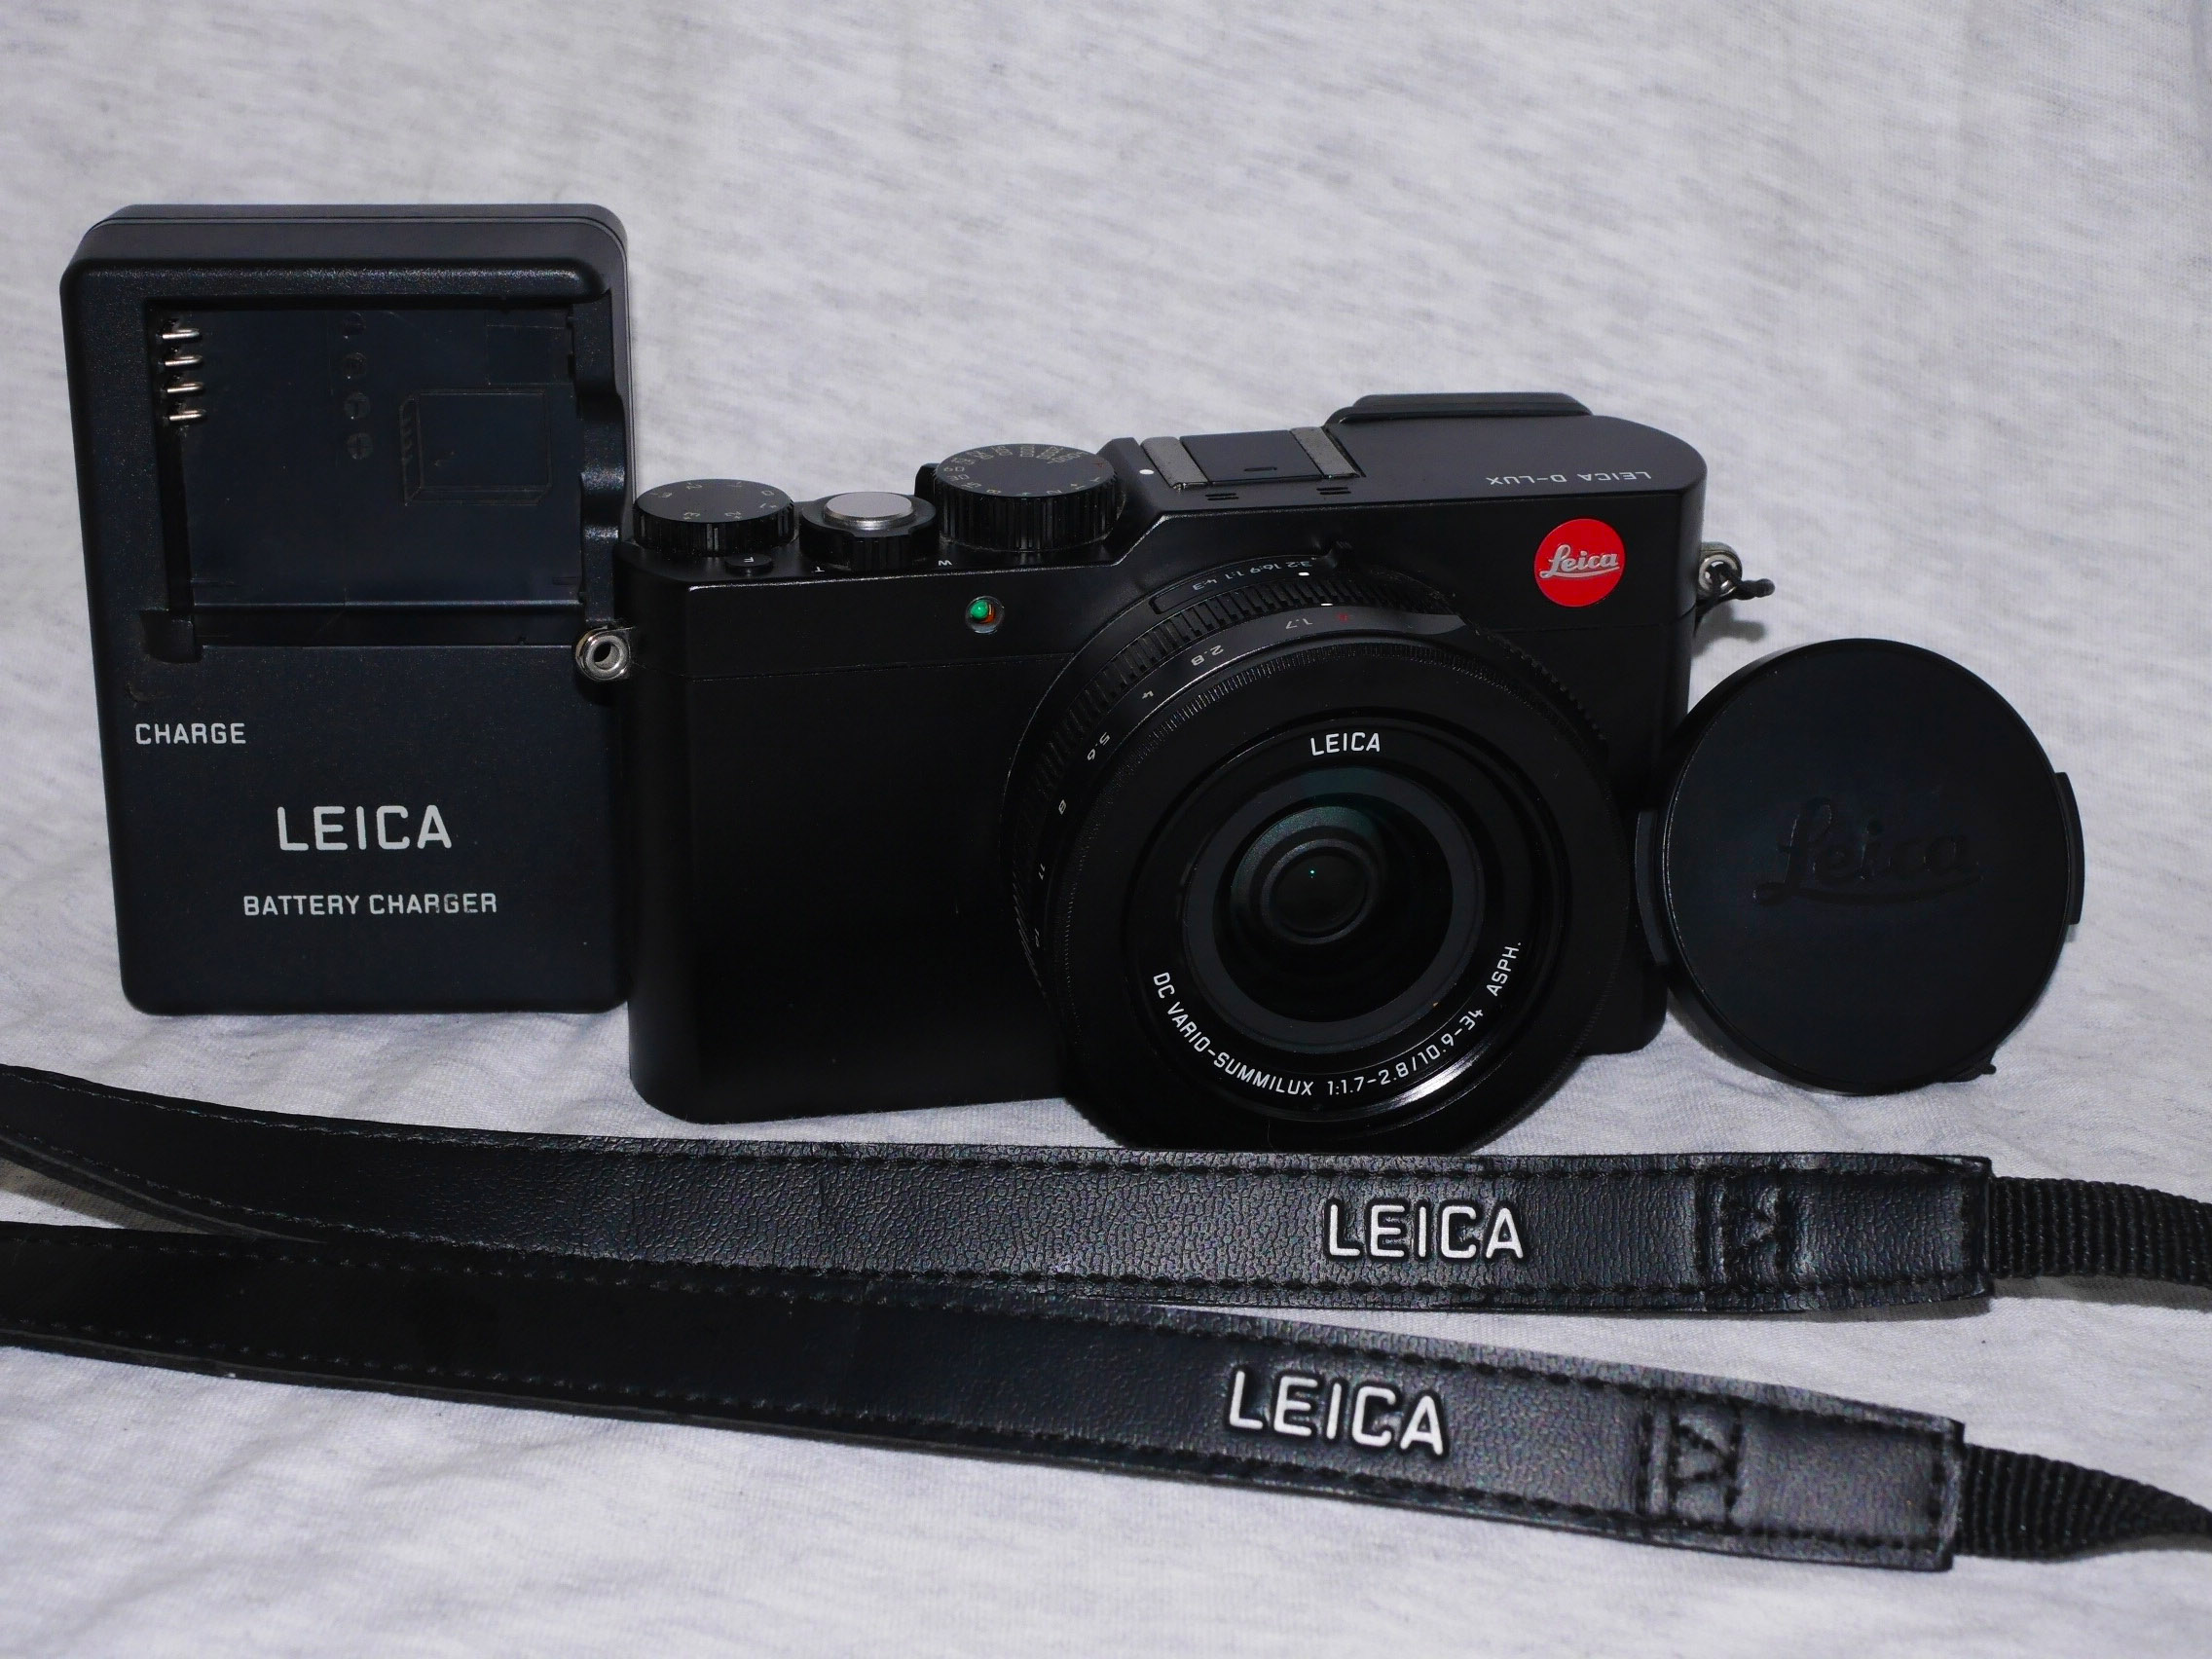 Leica D-Lux Type 109 Typ 109 4K Video Wi-Fi NFC camera with LEICA DC Vario-SUMMILUX 24-75mm F1.7-2.8 Lens, Leica D Lux Type-109, (Black) (18471)